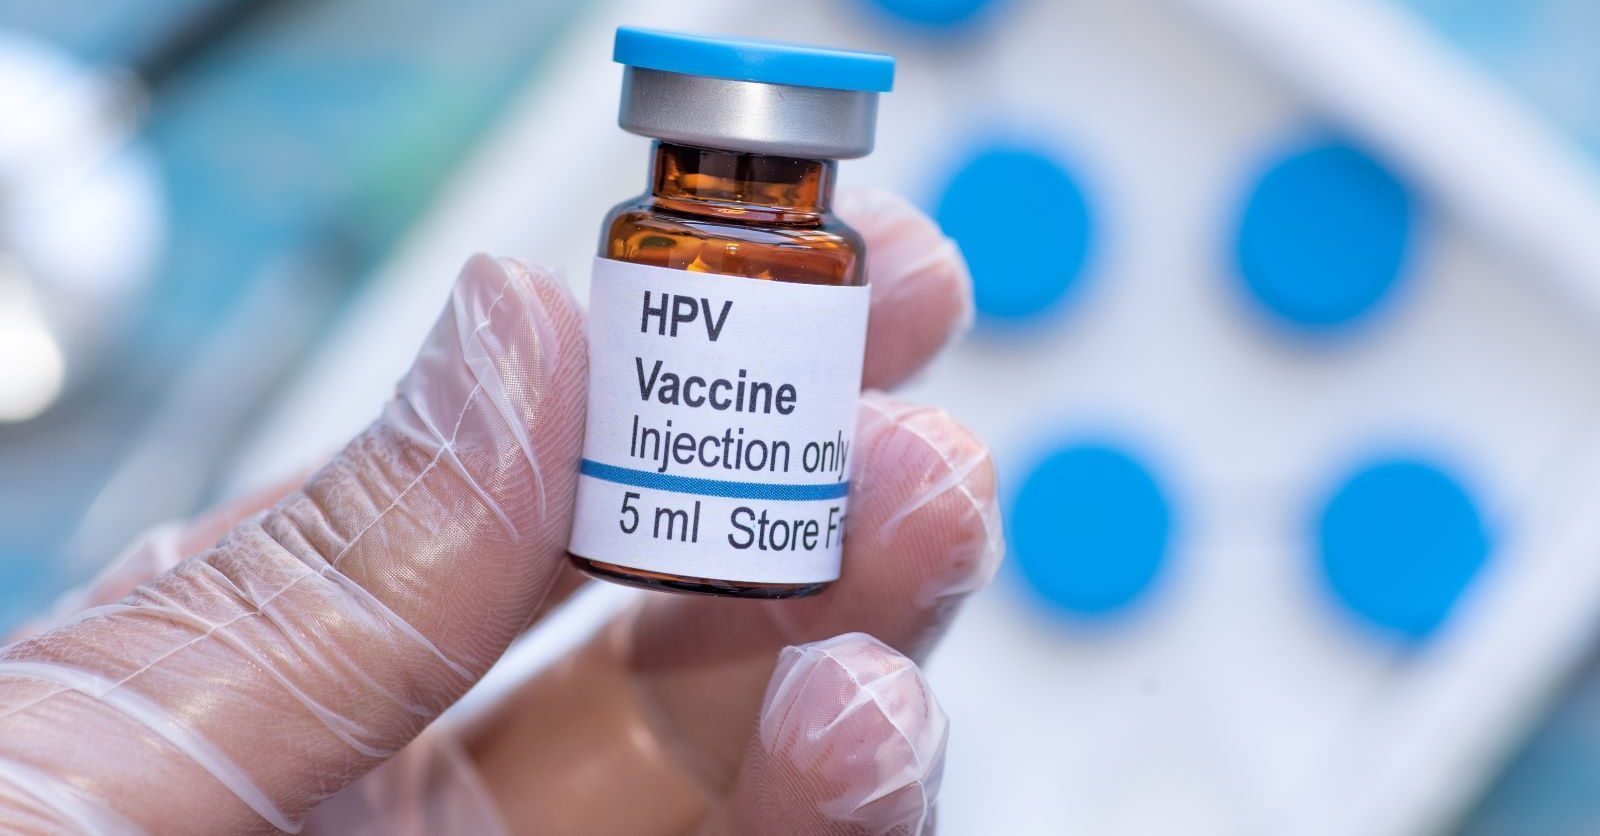 New research suggests that the human papillomavirus (HPV) vaccine is responsible for the 65% reduction in cervical cancer cases.